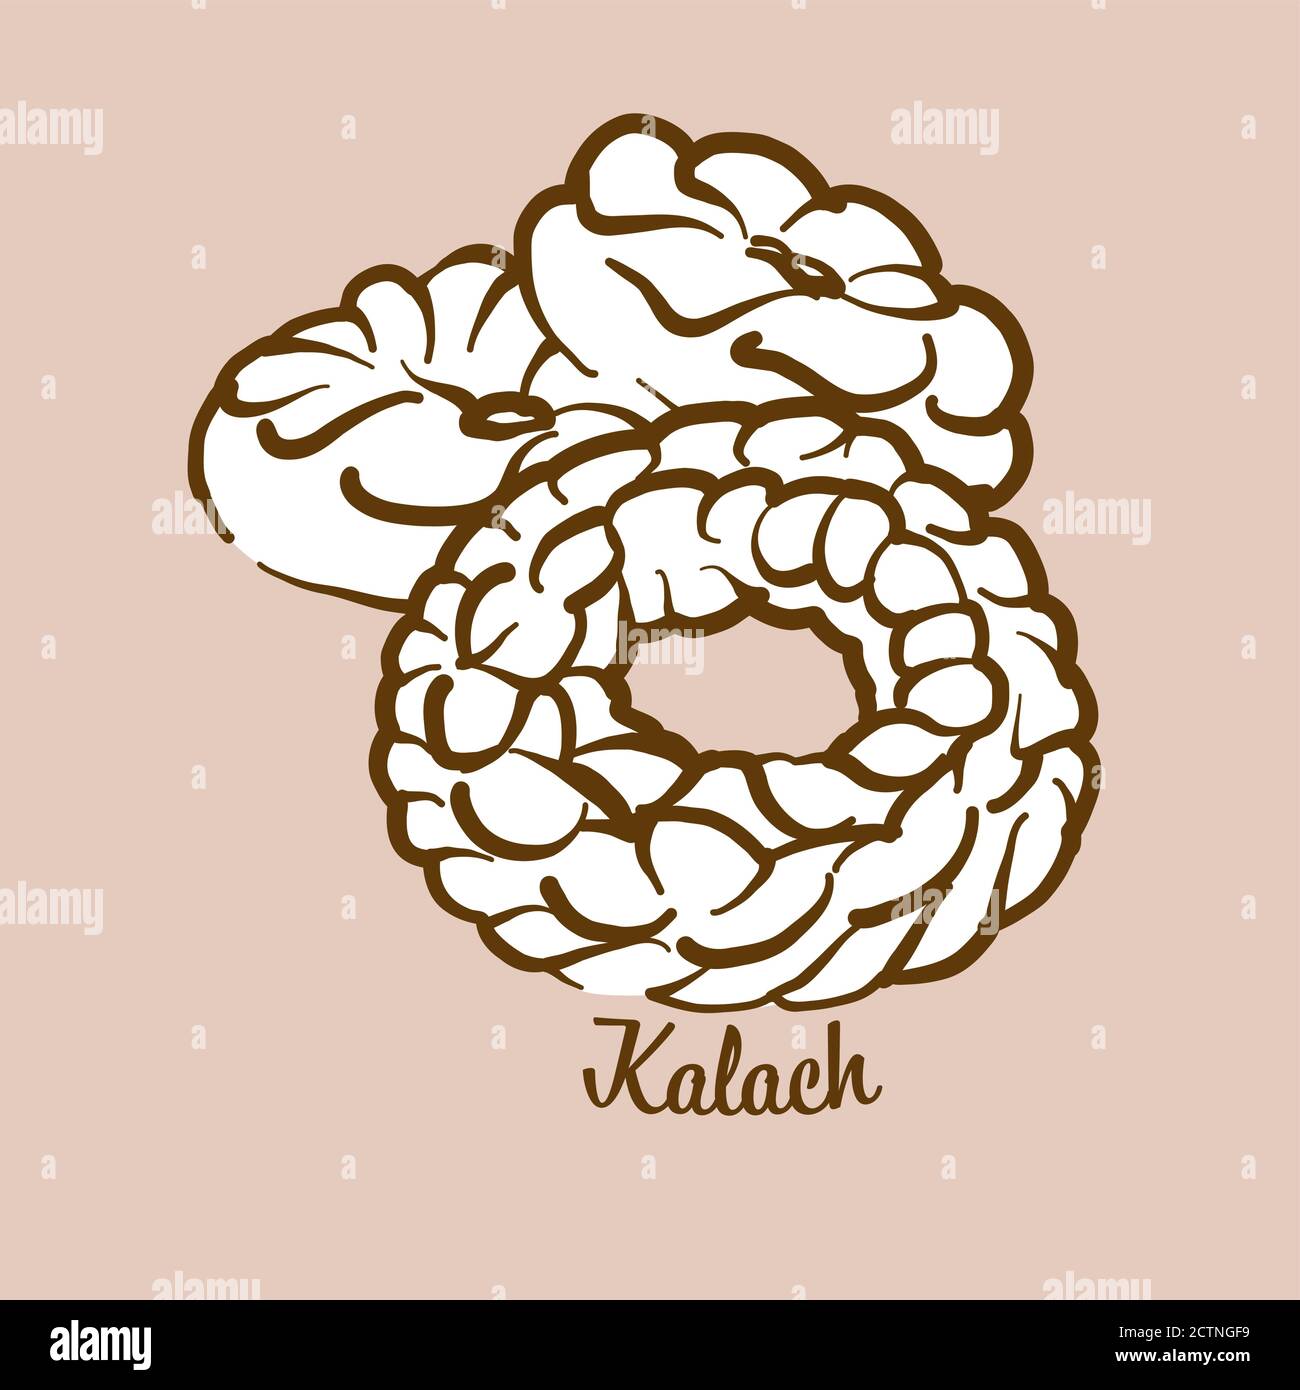 Hand-drawn Kalach bread illustration. Yeast bread, usually known in East Slavs. Vector drawing series. Stock Vector